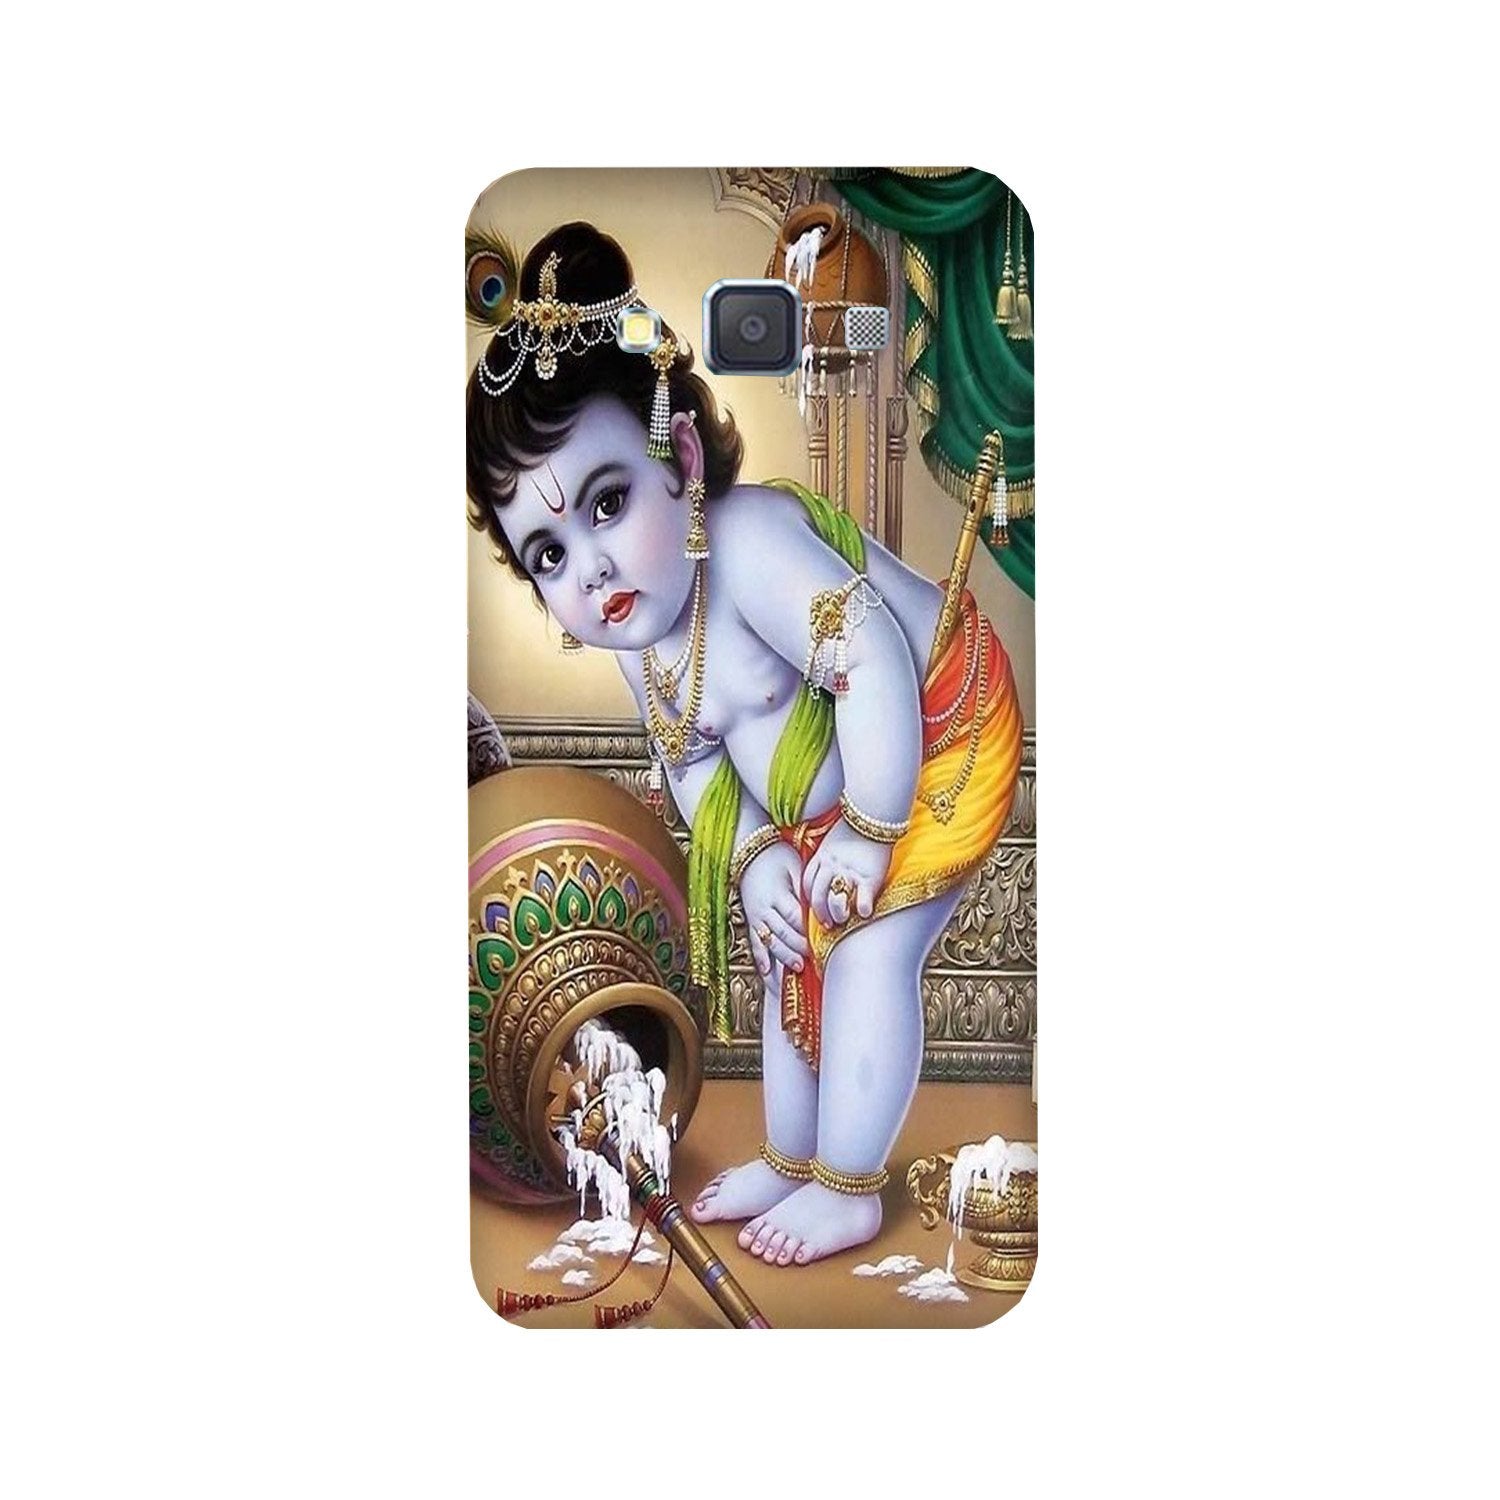 Bal Gopal2 Case for Galaxy ON5/ON5 Pro